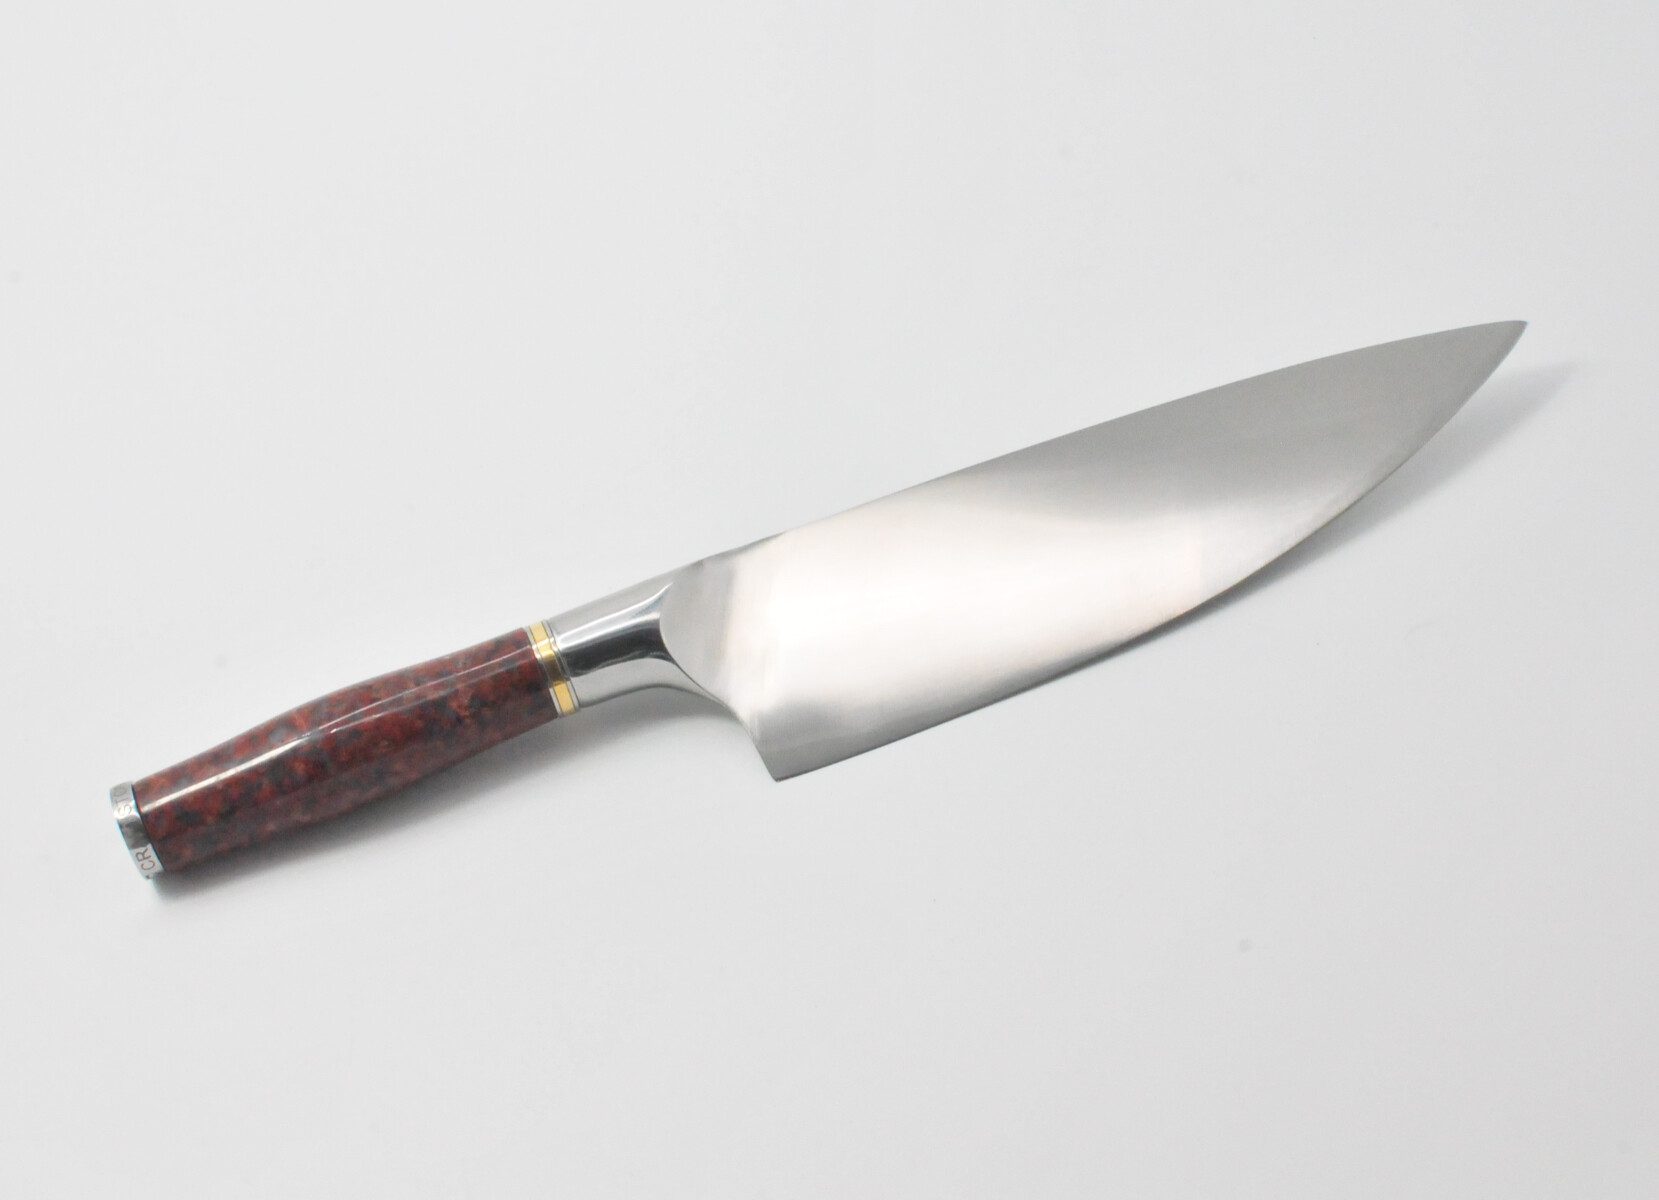 https://www.craftstoneknives.com/wp-content/uploads/bfi_thumb/10-Inch-Chef-Knife-with-a-Red-Granite-Handle-a-Garnet-Colored-Cubic-Zirconia-Stone-at-the-Back-of-the-Knife-and-Brass-and-Stainless-Steel-Decorative-Rings-3jbc4tjwm4olderoghbuh6.jpg